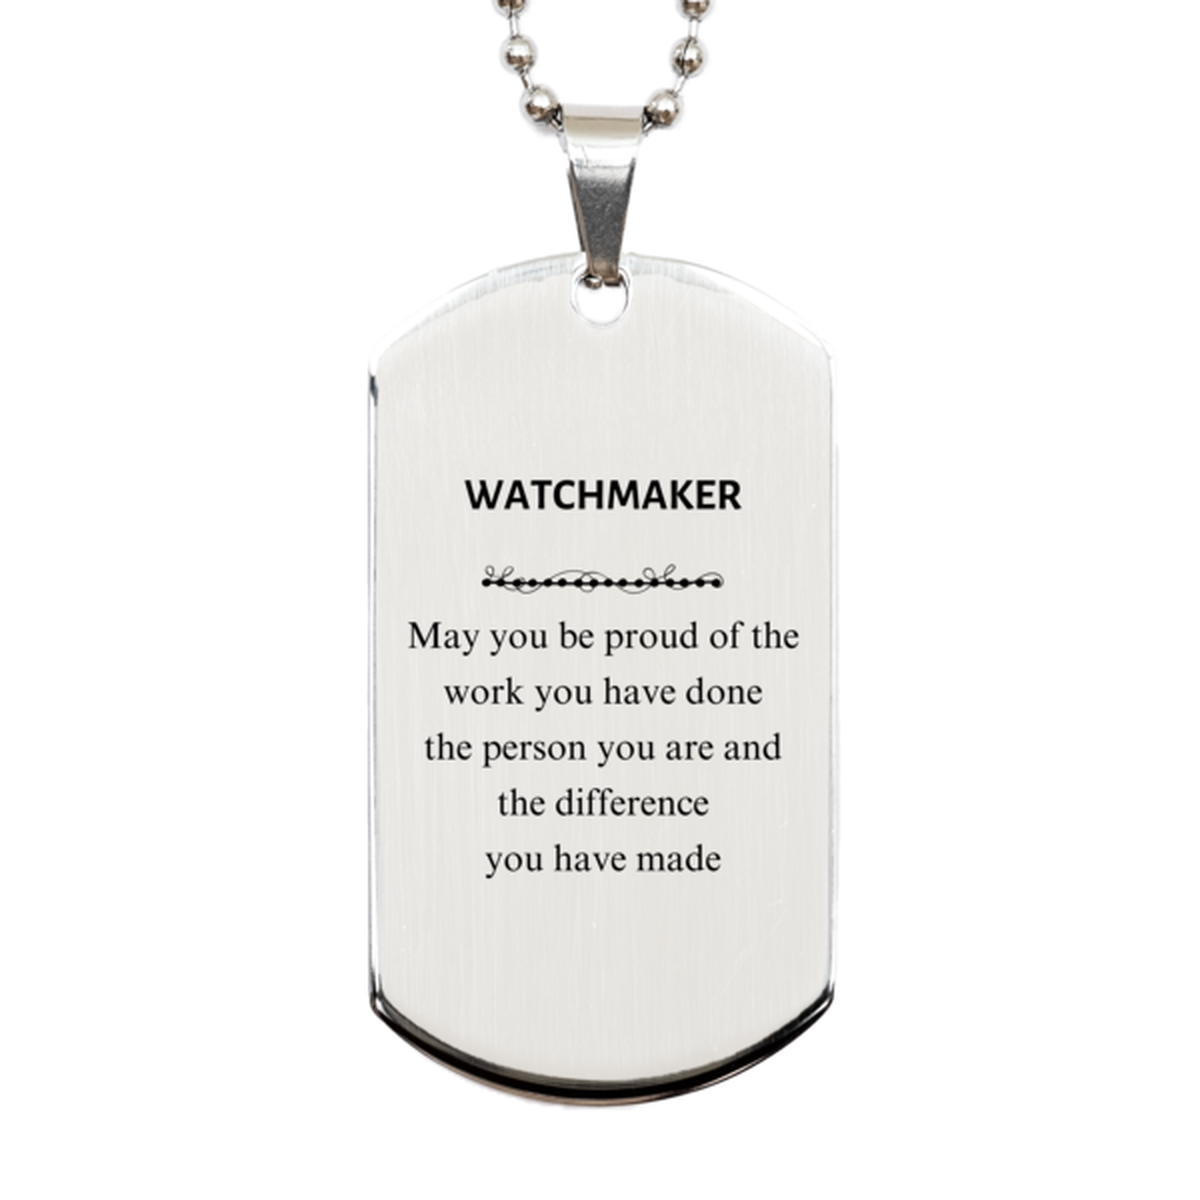 Watchmaker May you be proud of the work you have done, Retirement Watchmaker Silver Dog Tag for Colleague Appreciation Gifts Amazing for Watchmaker